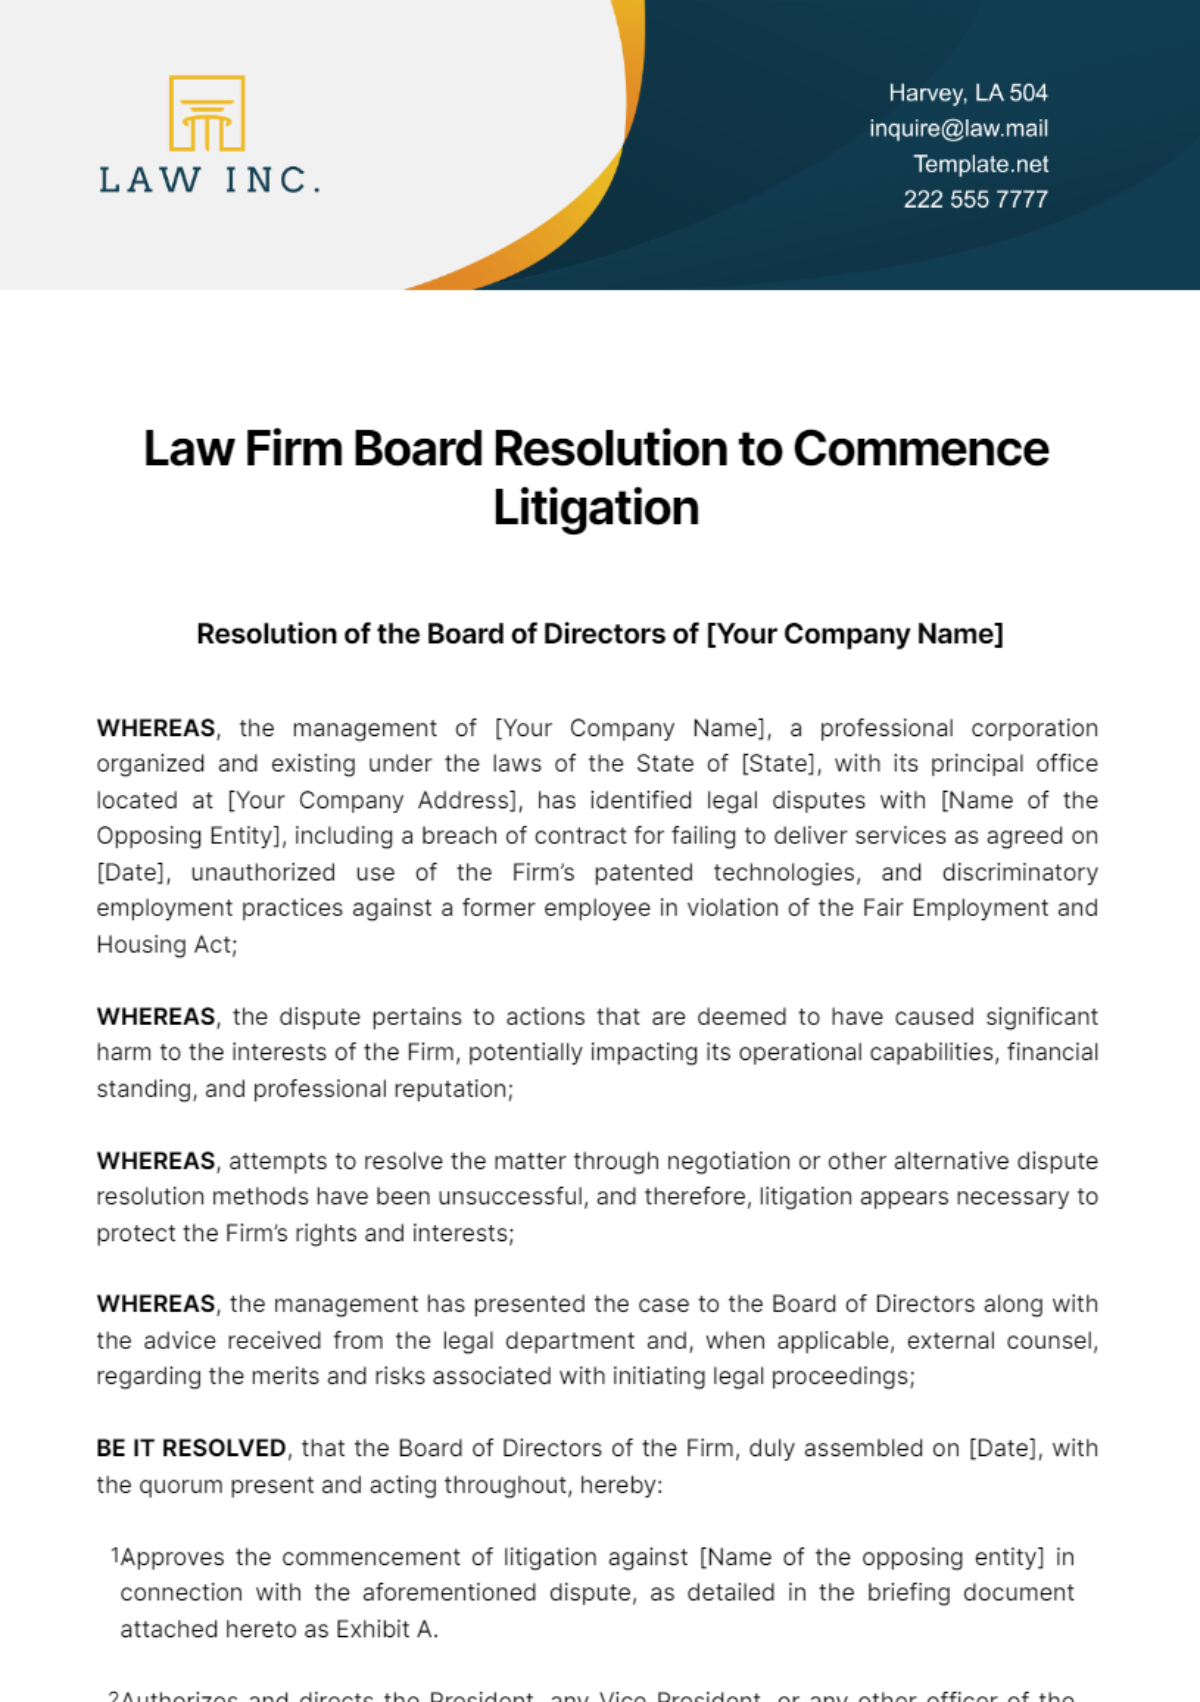 Law Firm Board Resolution to Commence Litigation Template